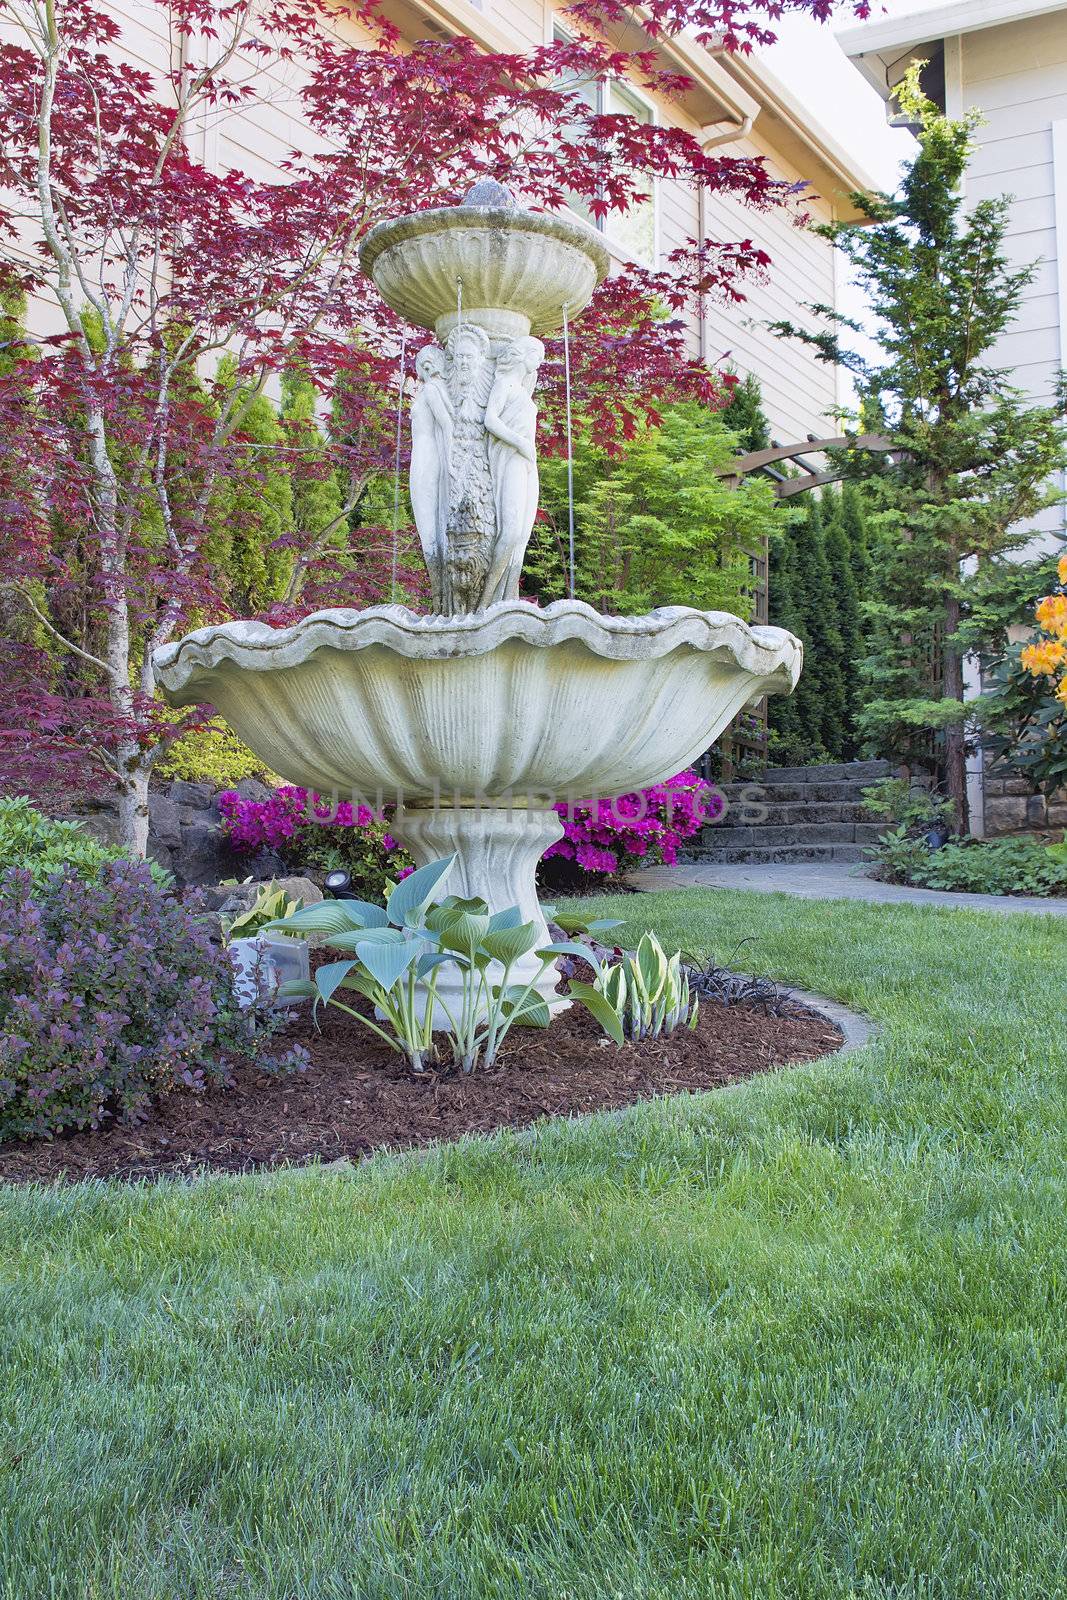 Renaissance Water Fountain on Front Lawn Landscaping with Trees and Flowering Shrubs